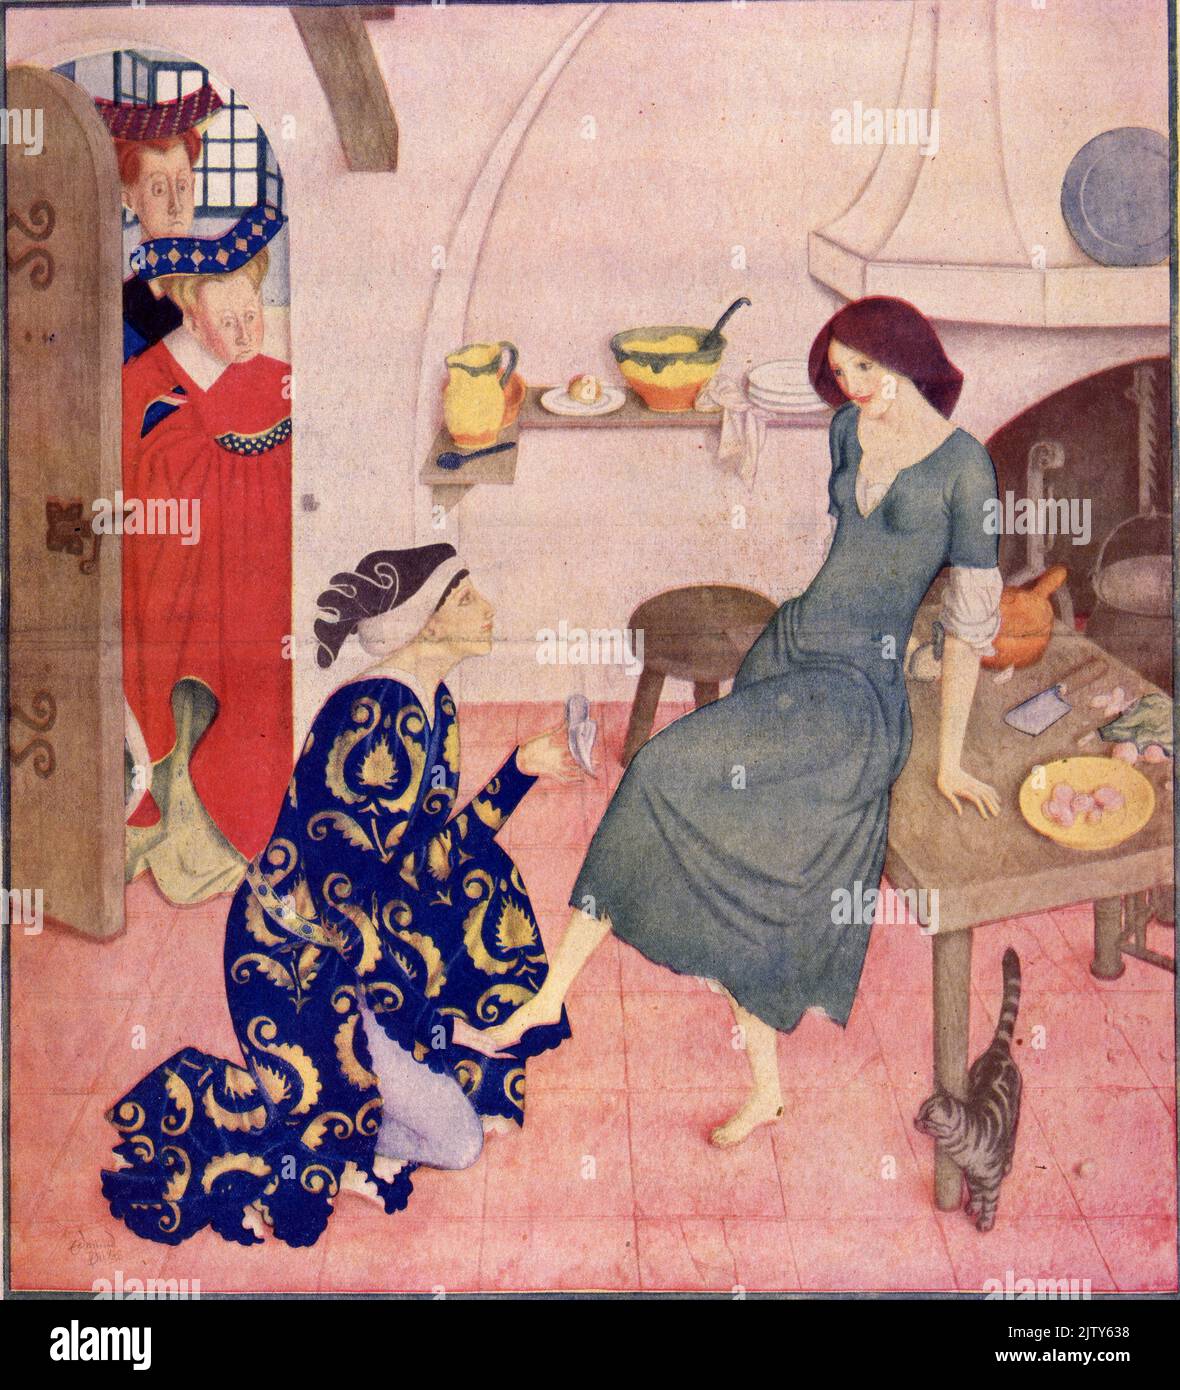 'Cinderella and Prince Charming' published April 10,1932 in the American Weekly painted by Edmund Dulac for the 'Enchanting Fairyland Lovers' series. Stock Photo